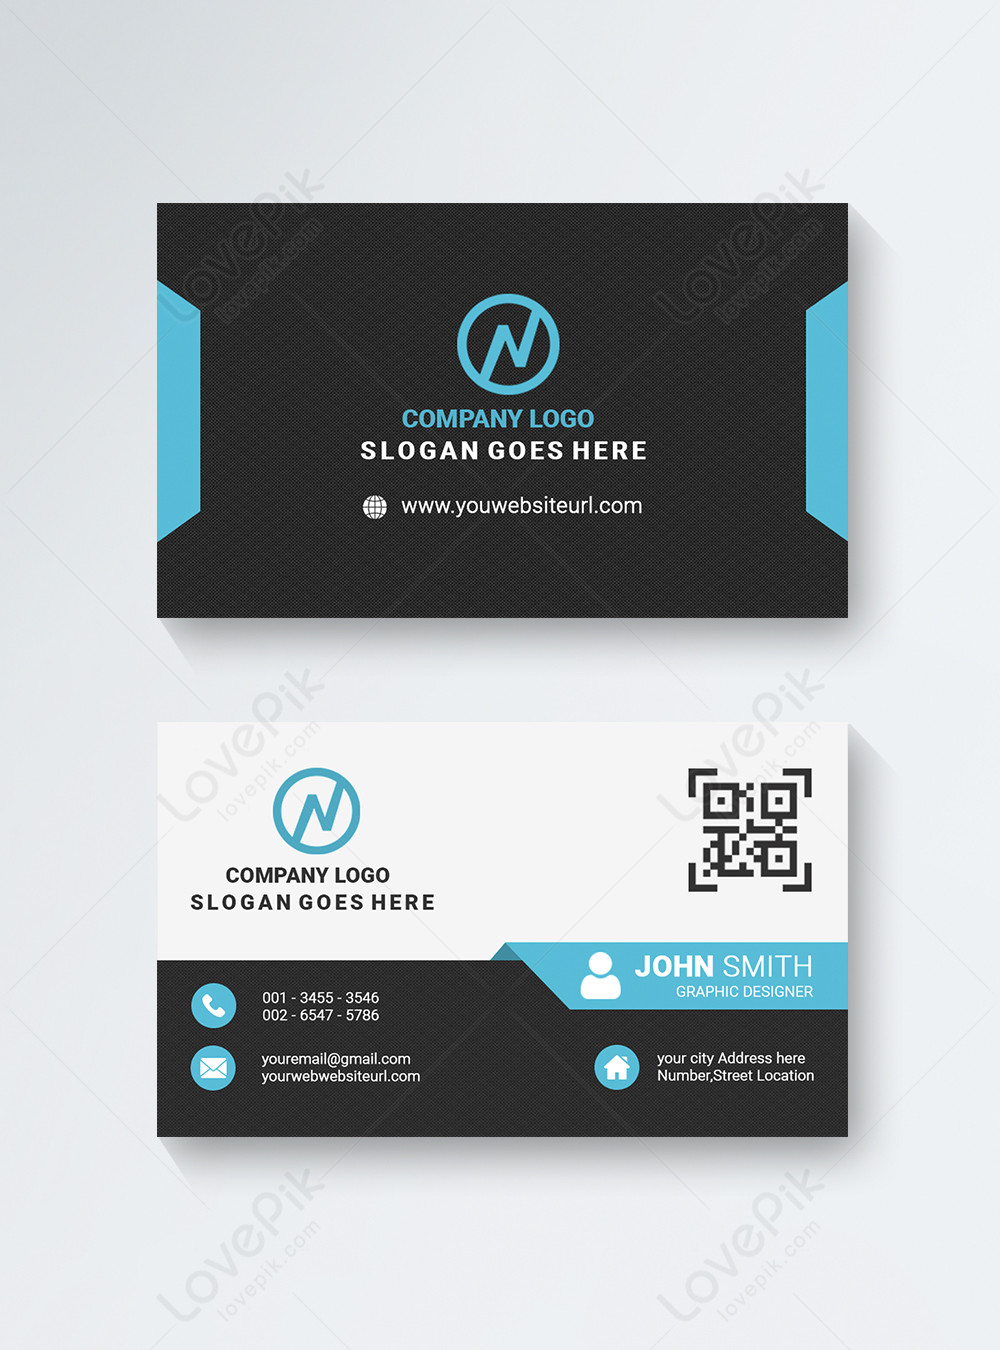 Modern professional business card template image_picture free